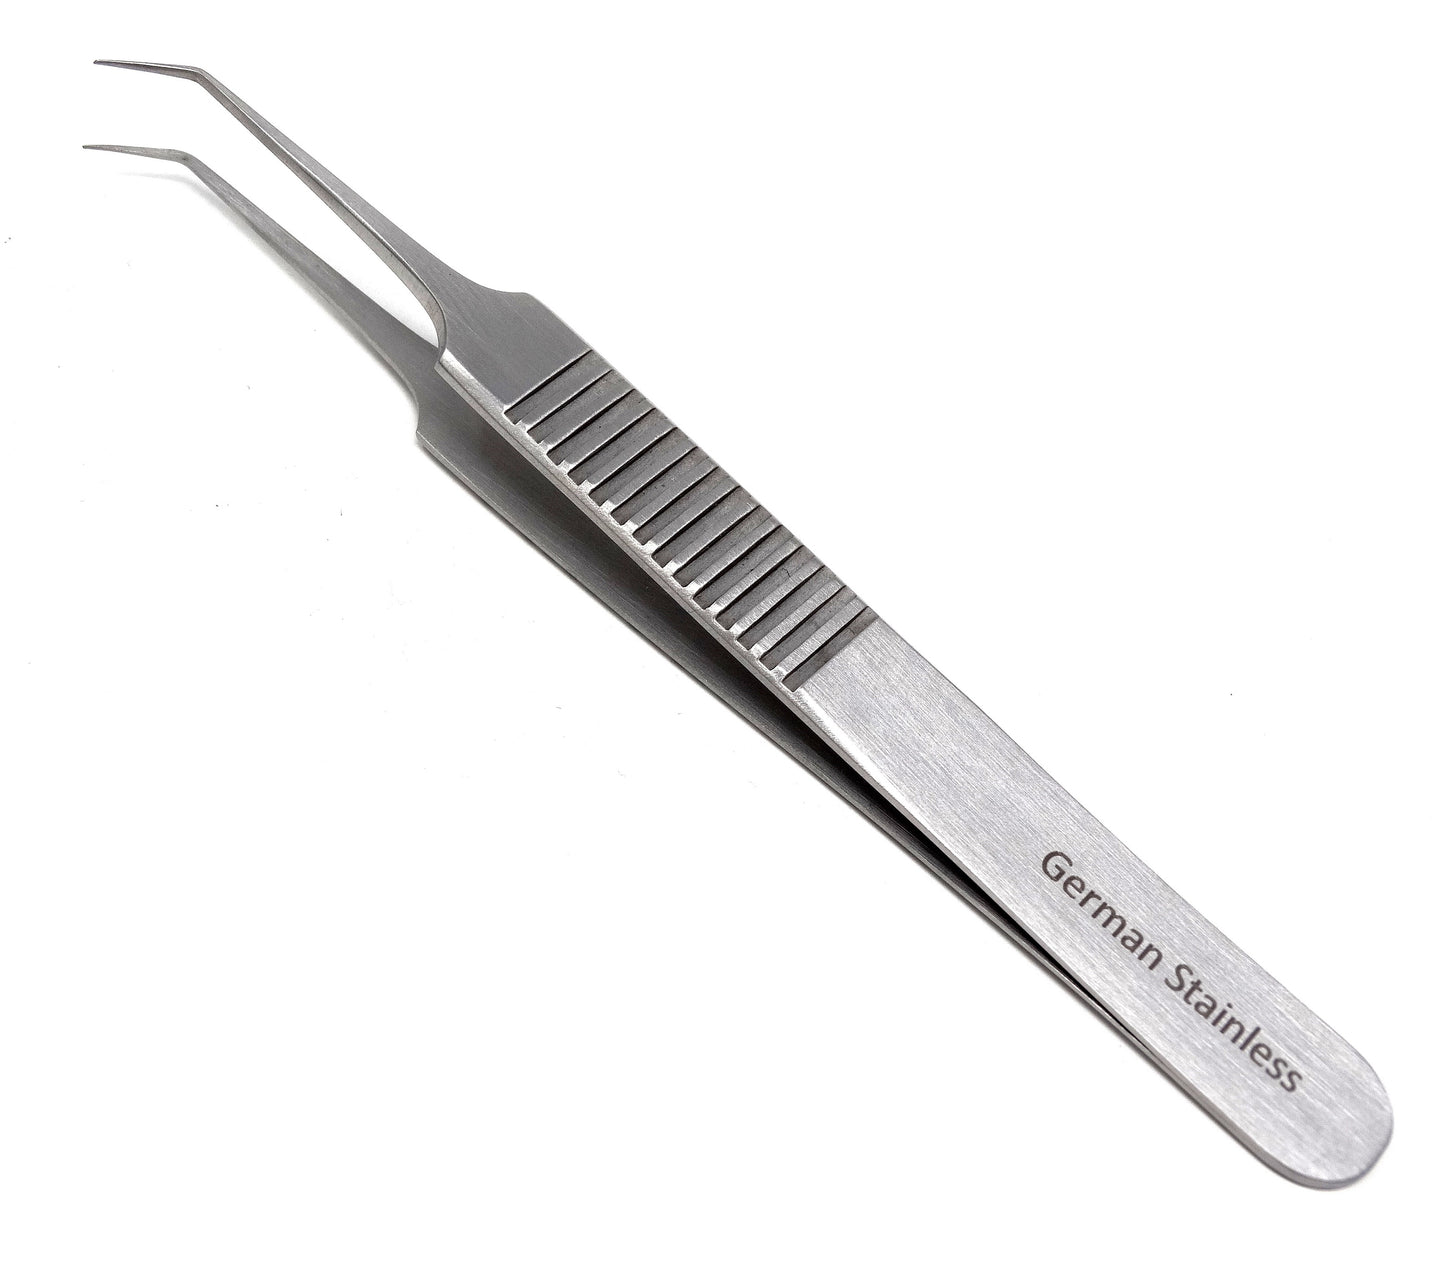 Stainless Steel Micro Surgical Forceps Tweezers A Type Angled, Ridged Handle, Fine Point, Premium Quality